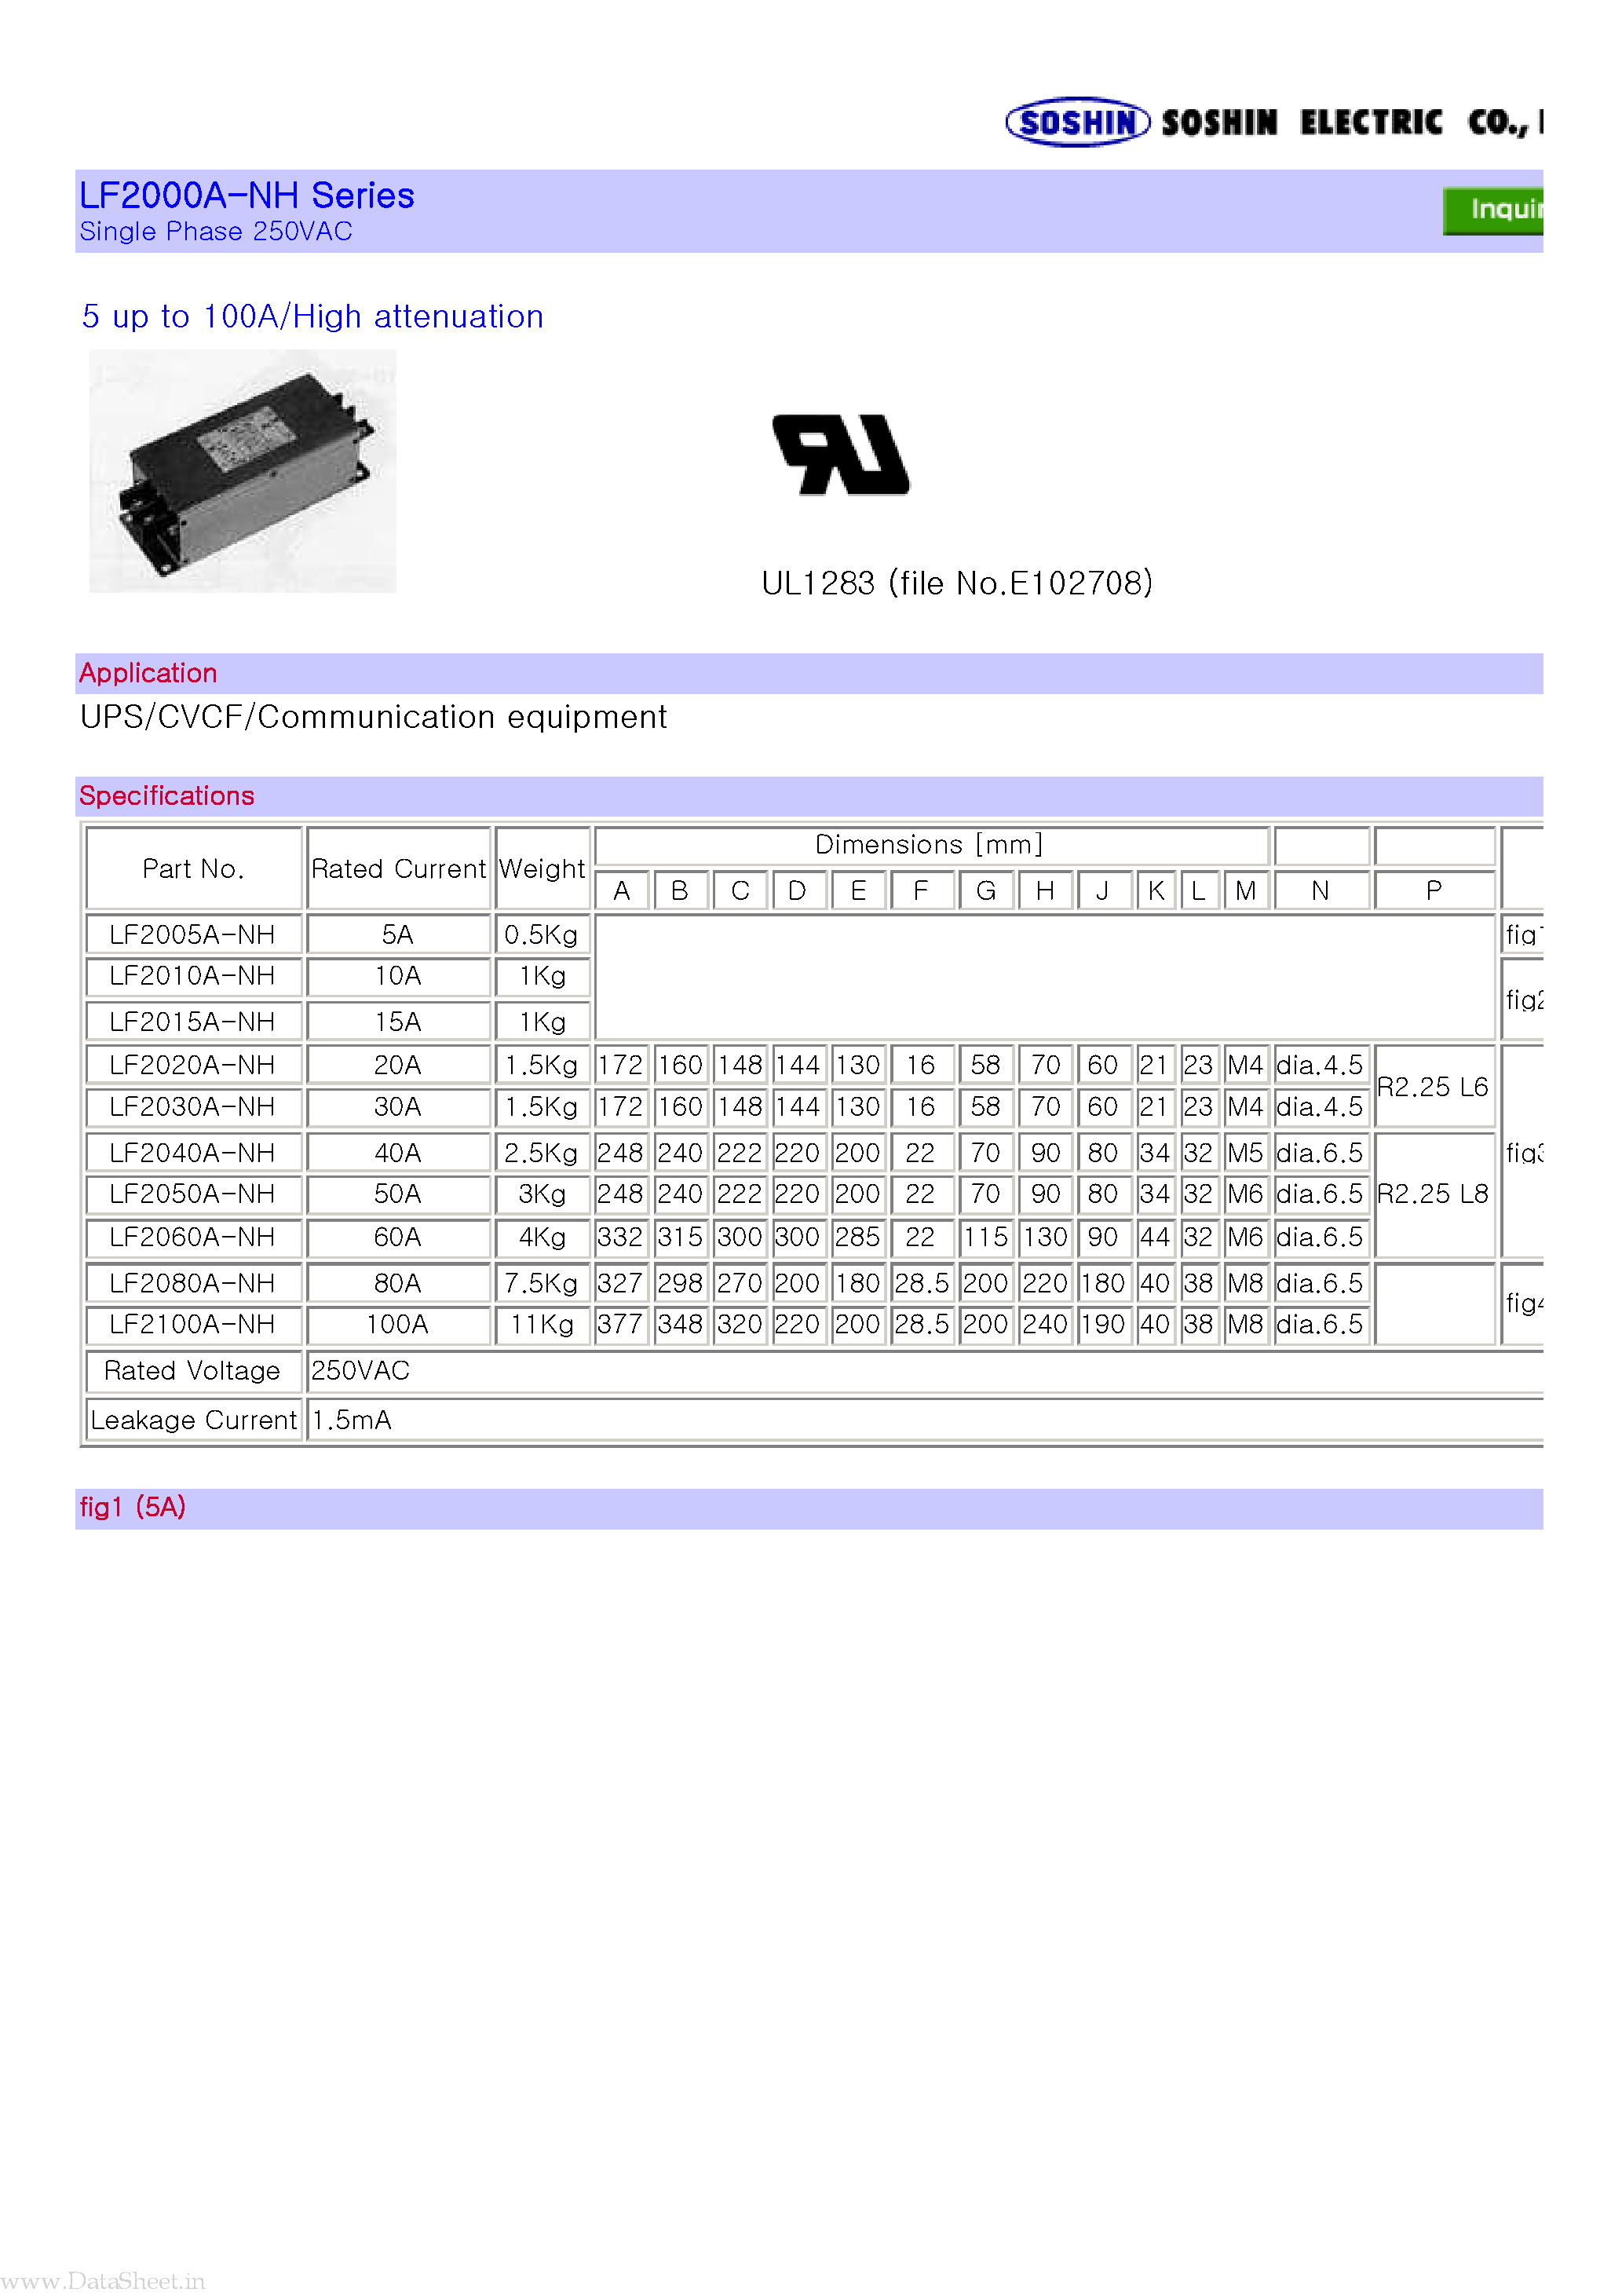 Datasheet LF2000A-NH - 5 up to 100A/High attenuation page 1